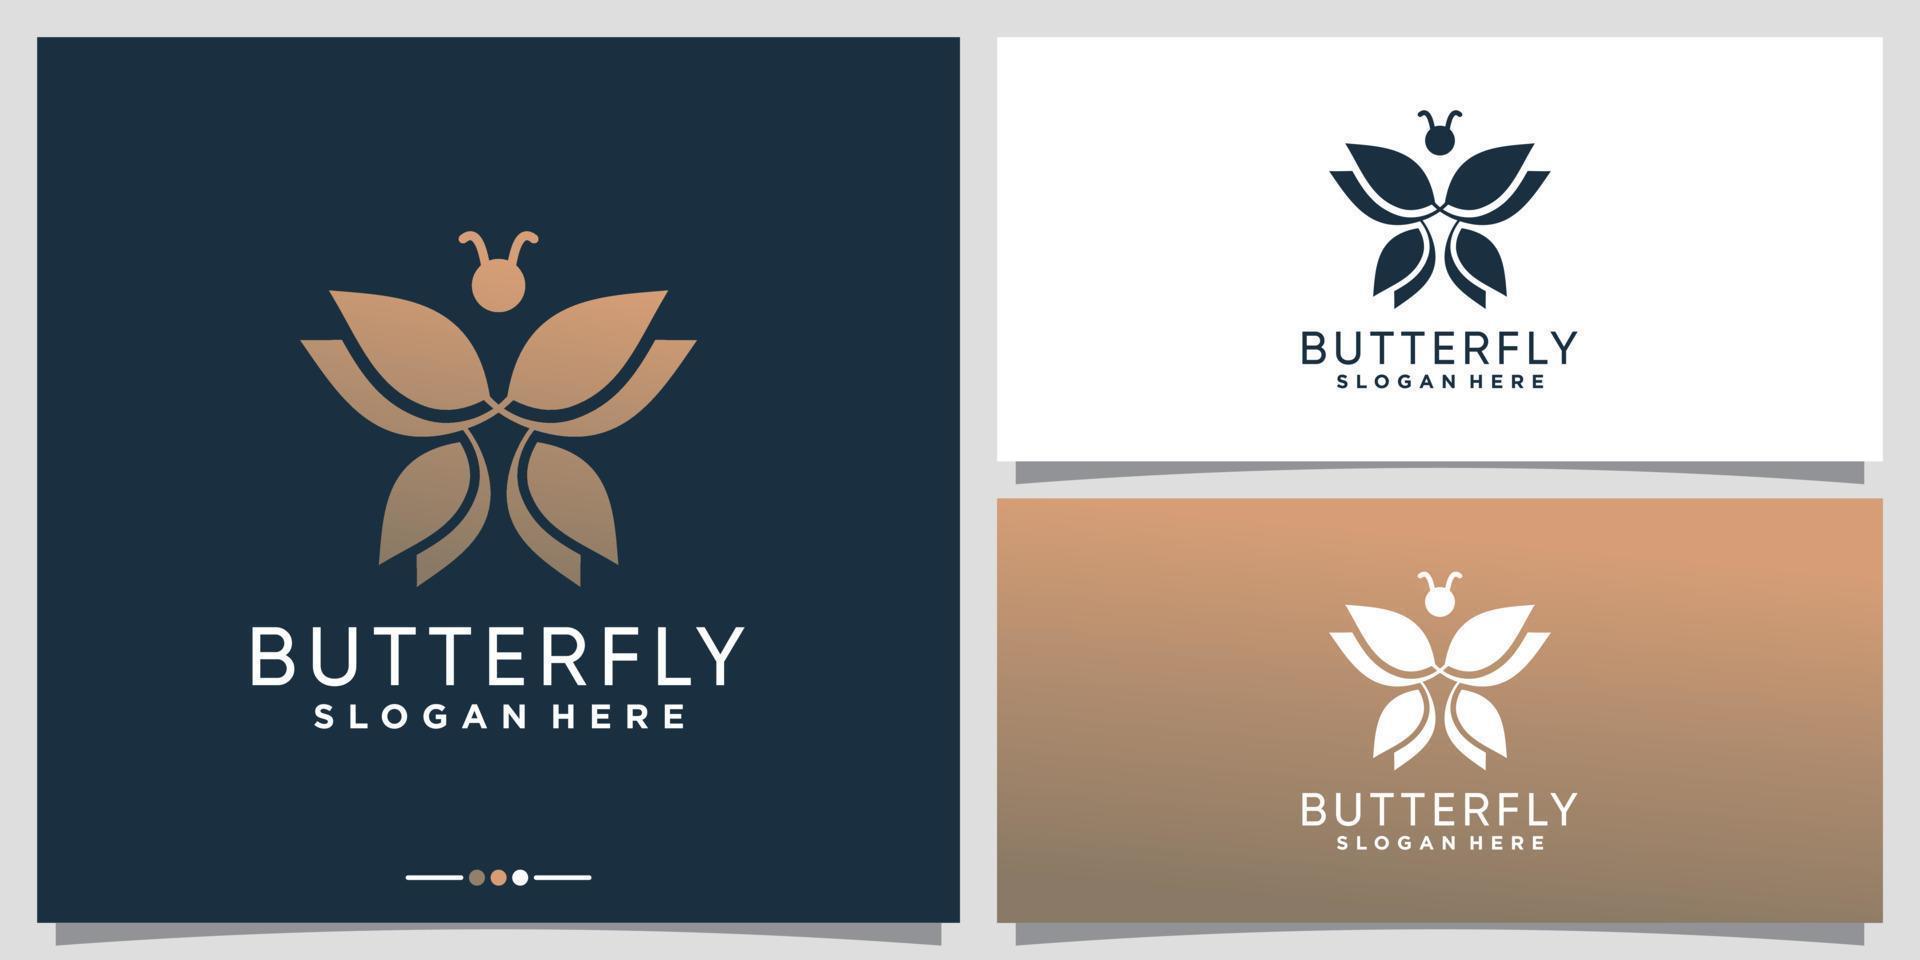 Simple and elegant butterfly logo design template with creative concept Premium Vector